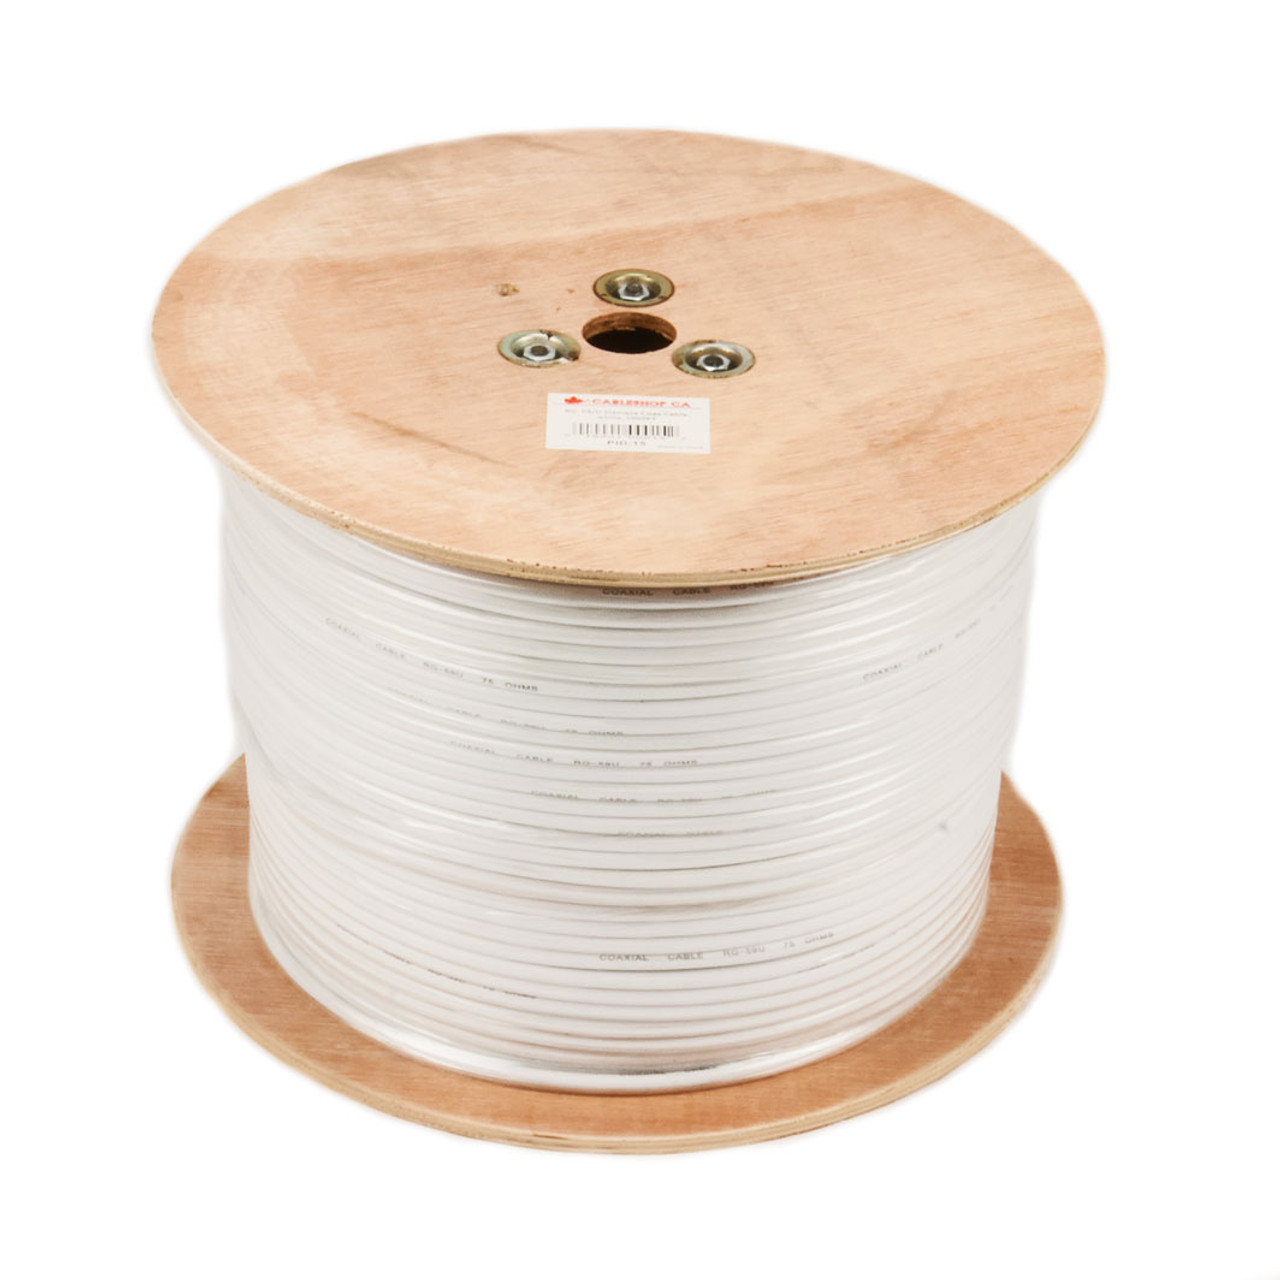 RJ11 Modular Telephone Wire Cable, 6P4C, 1000ft